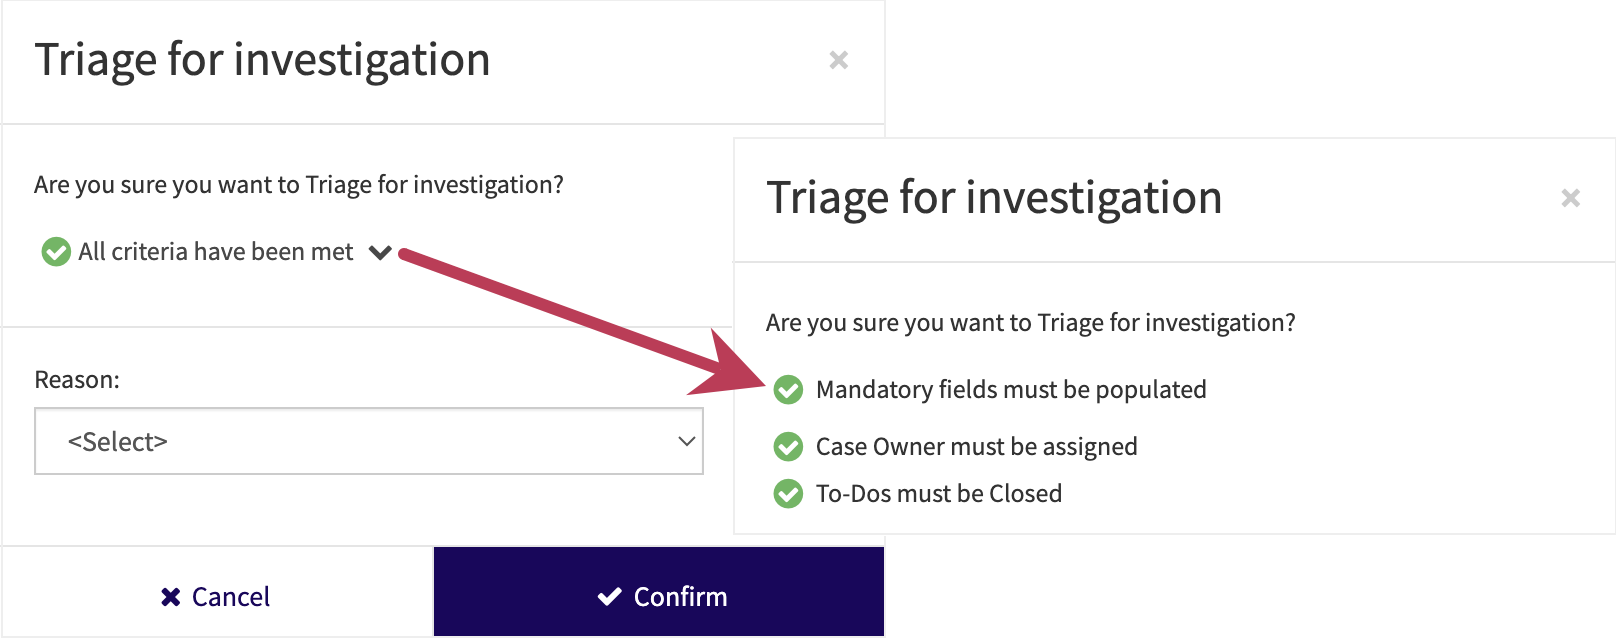 The step menu shows that all of the criteria have been met and that clicking the arrow will show all of the criteria. The Confirm button is clickable now.